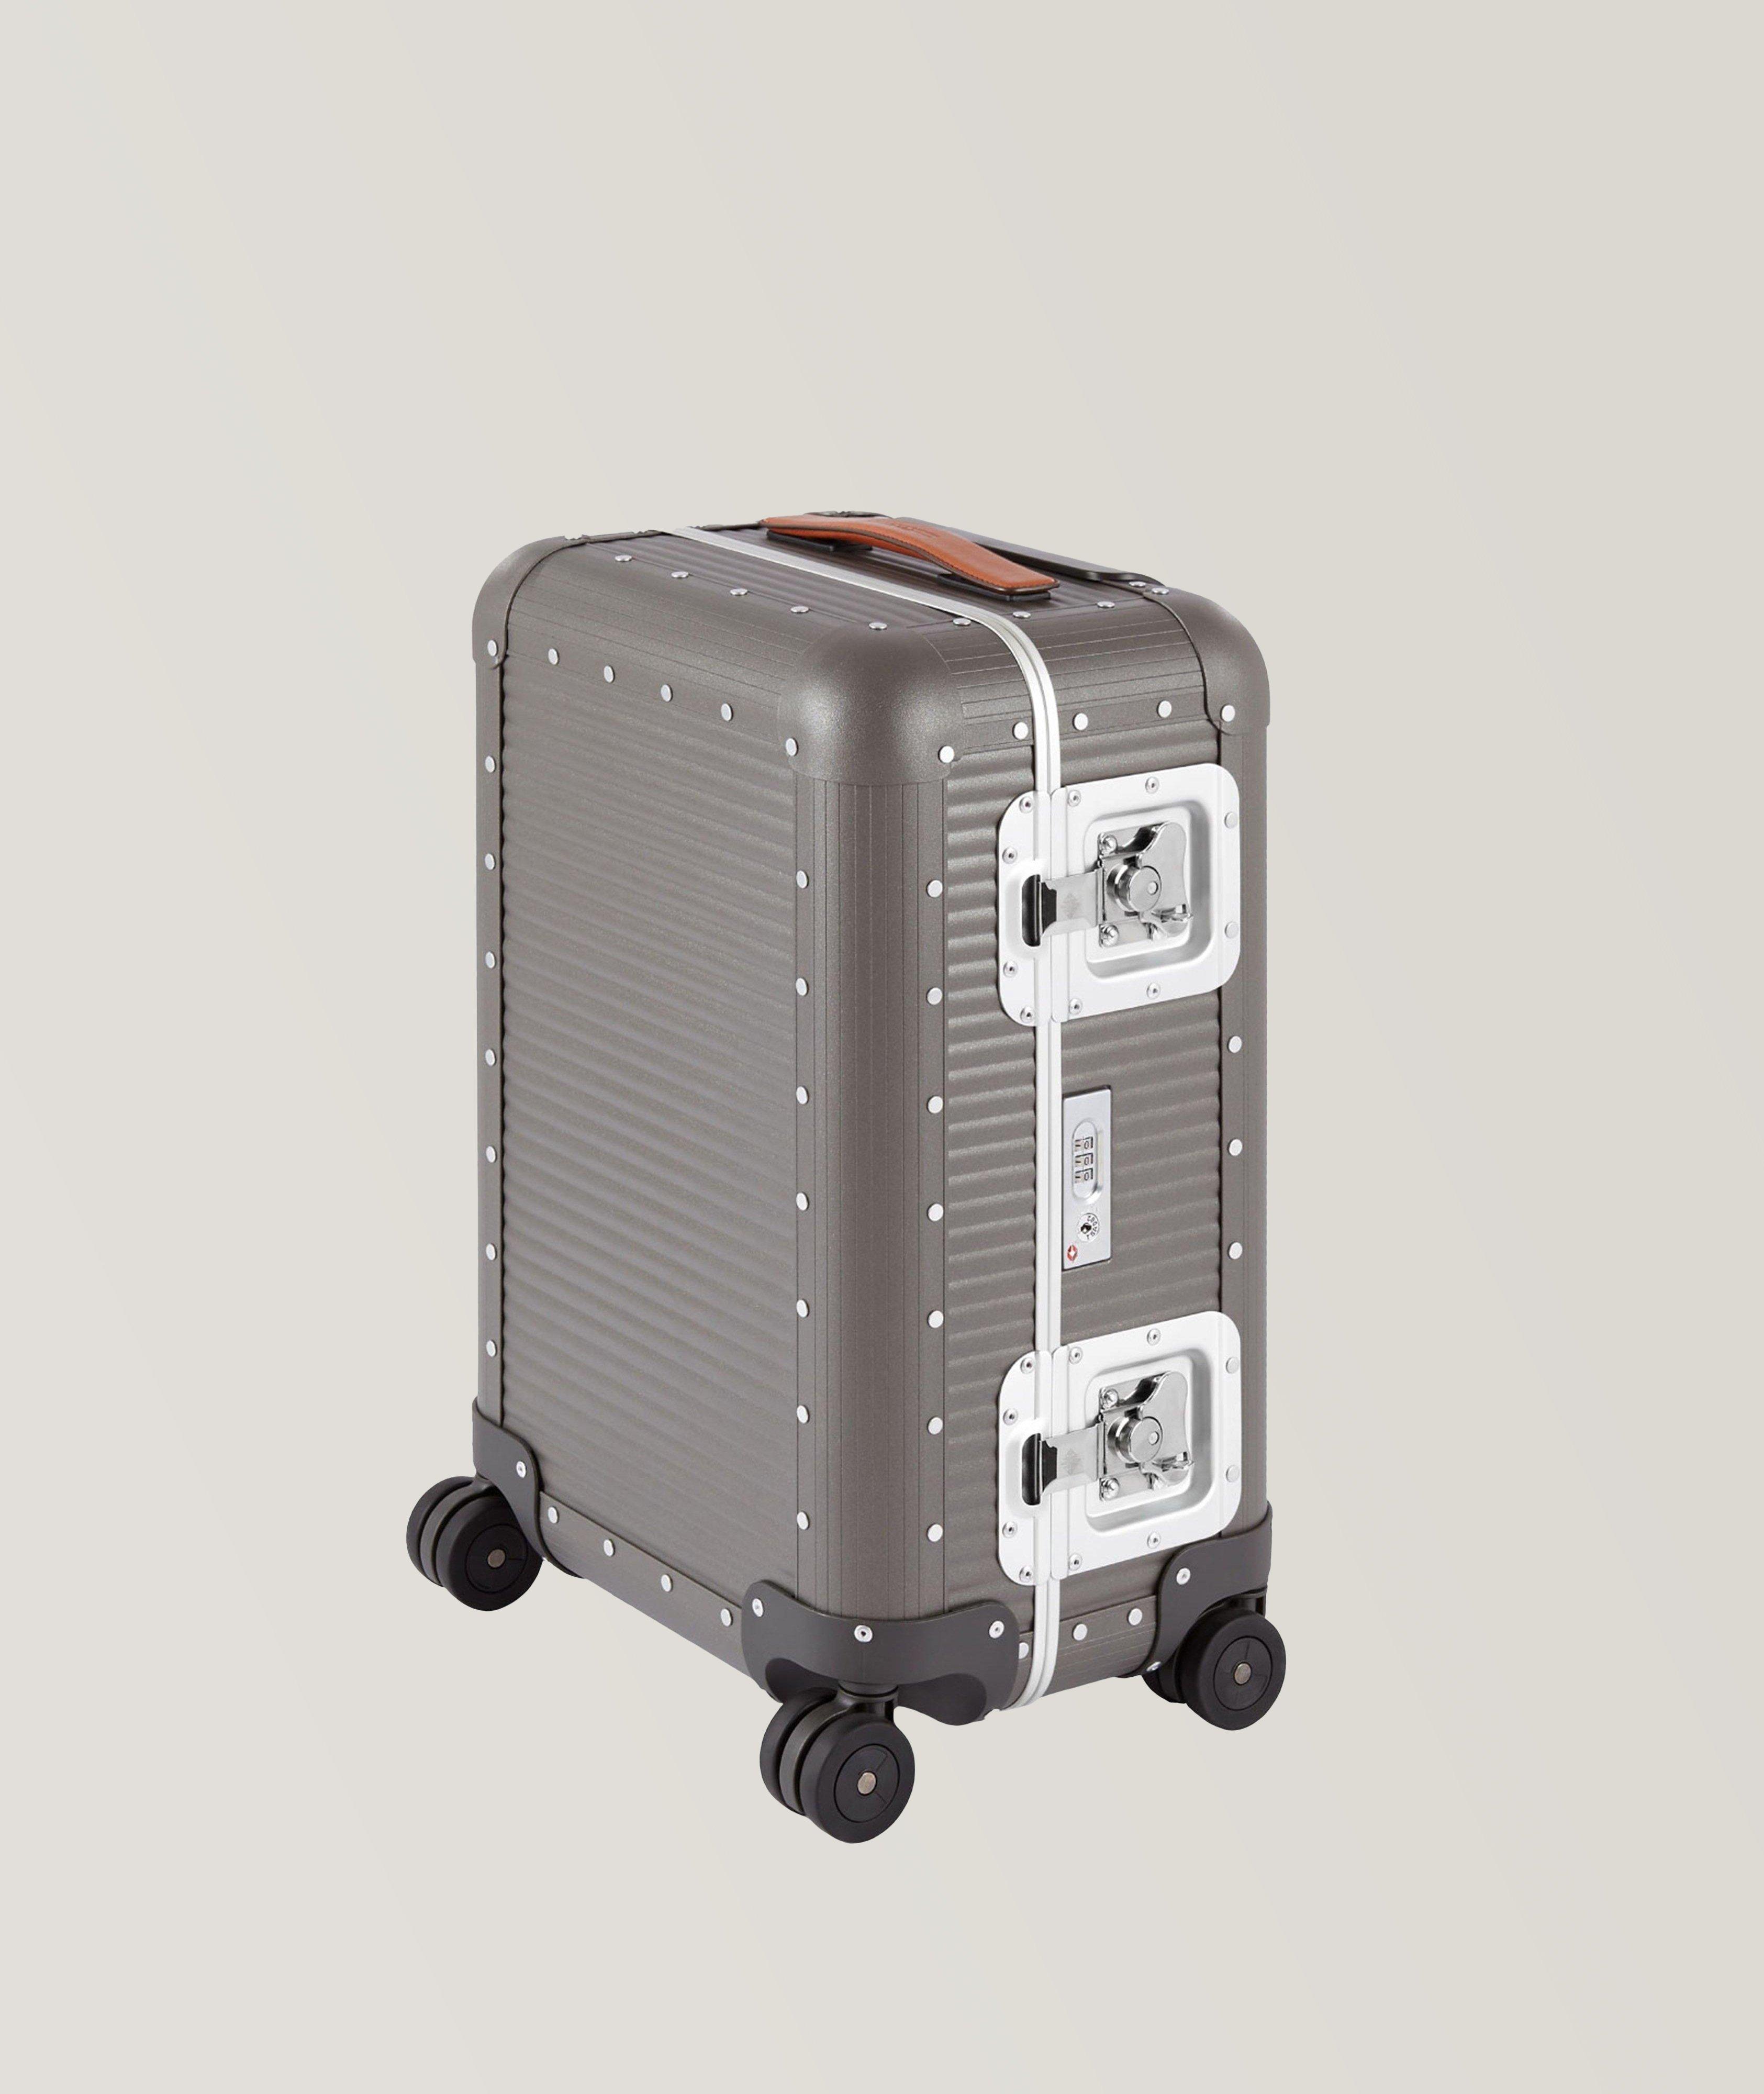 Bank Spinner 55M Carry-On Luggage image 0